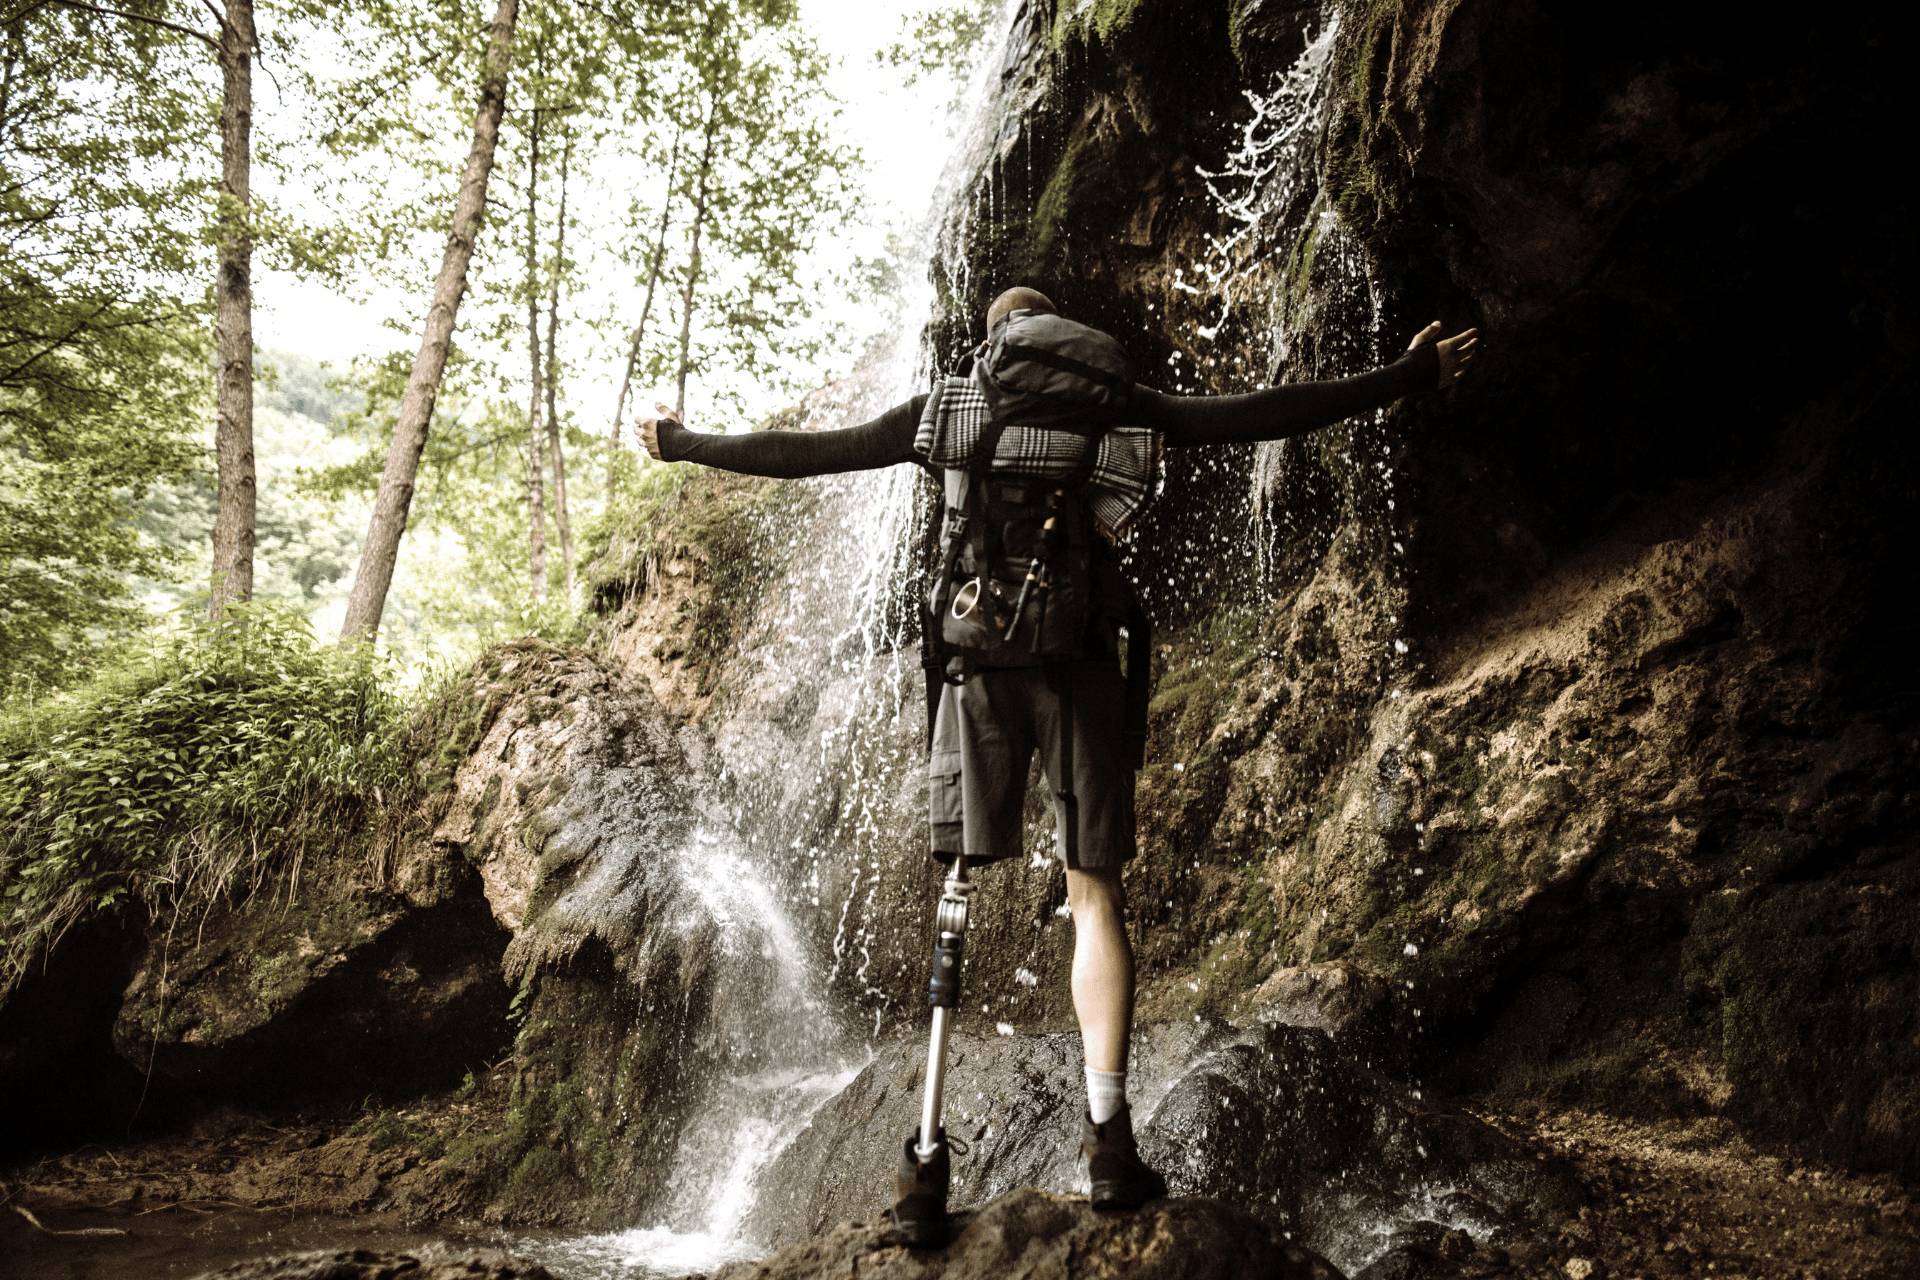 A amputee climbing with a waterfall